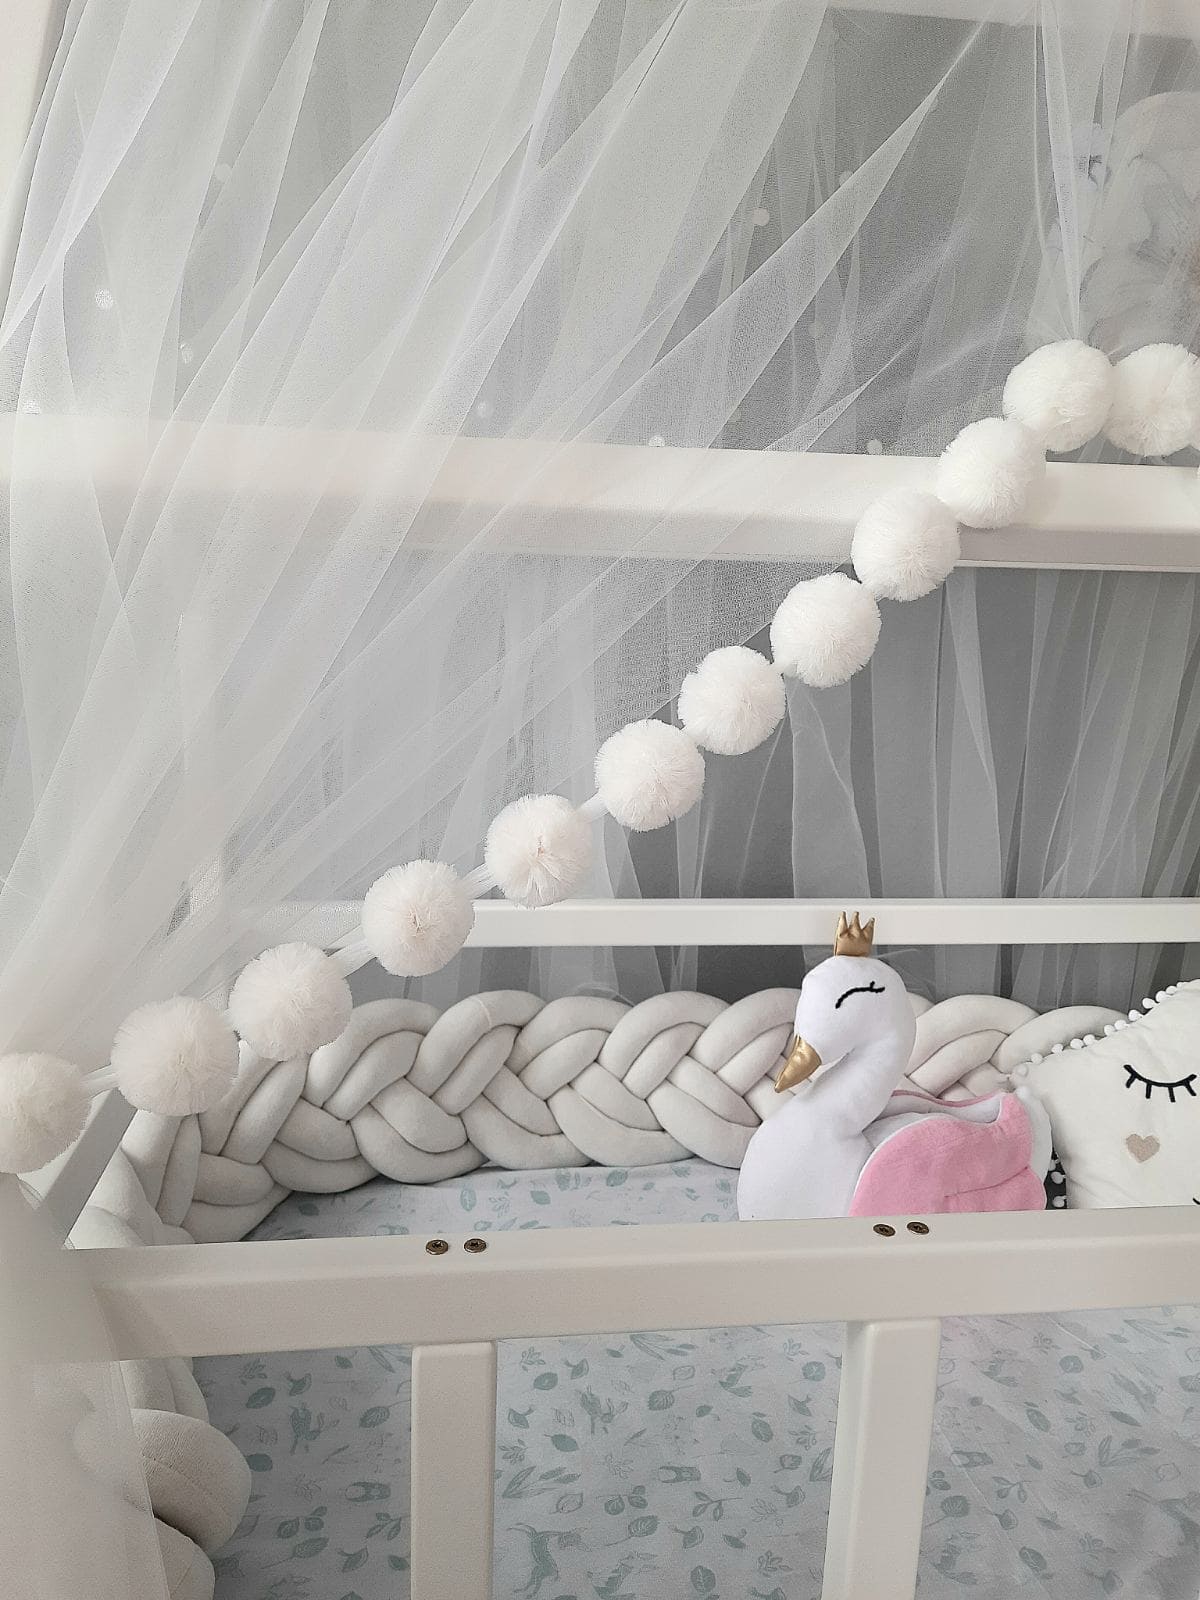 White Montessori Canopy with Pom Poms for nursery. Inside Montessori bed white swan pillow, star pillow and Double braided crib bumper. Close-up slight left view of the front side